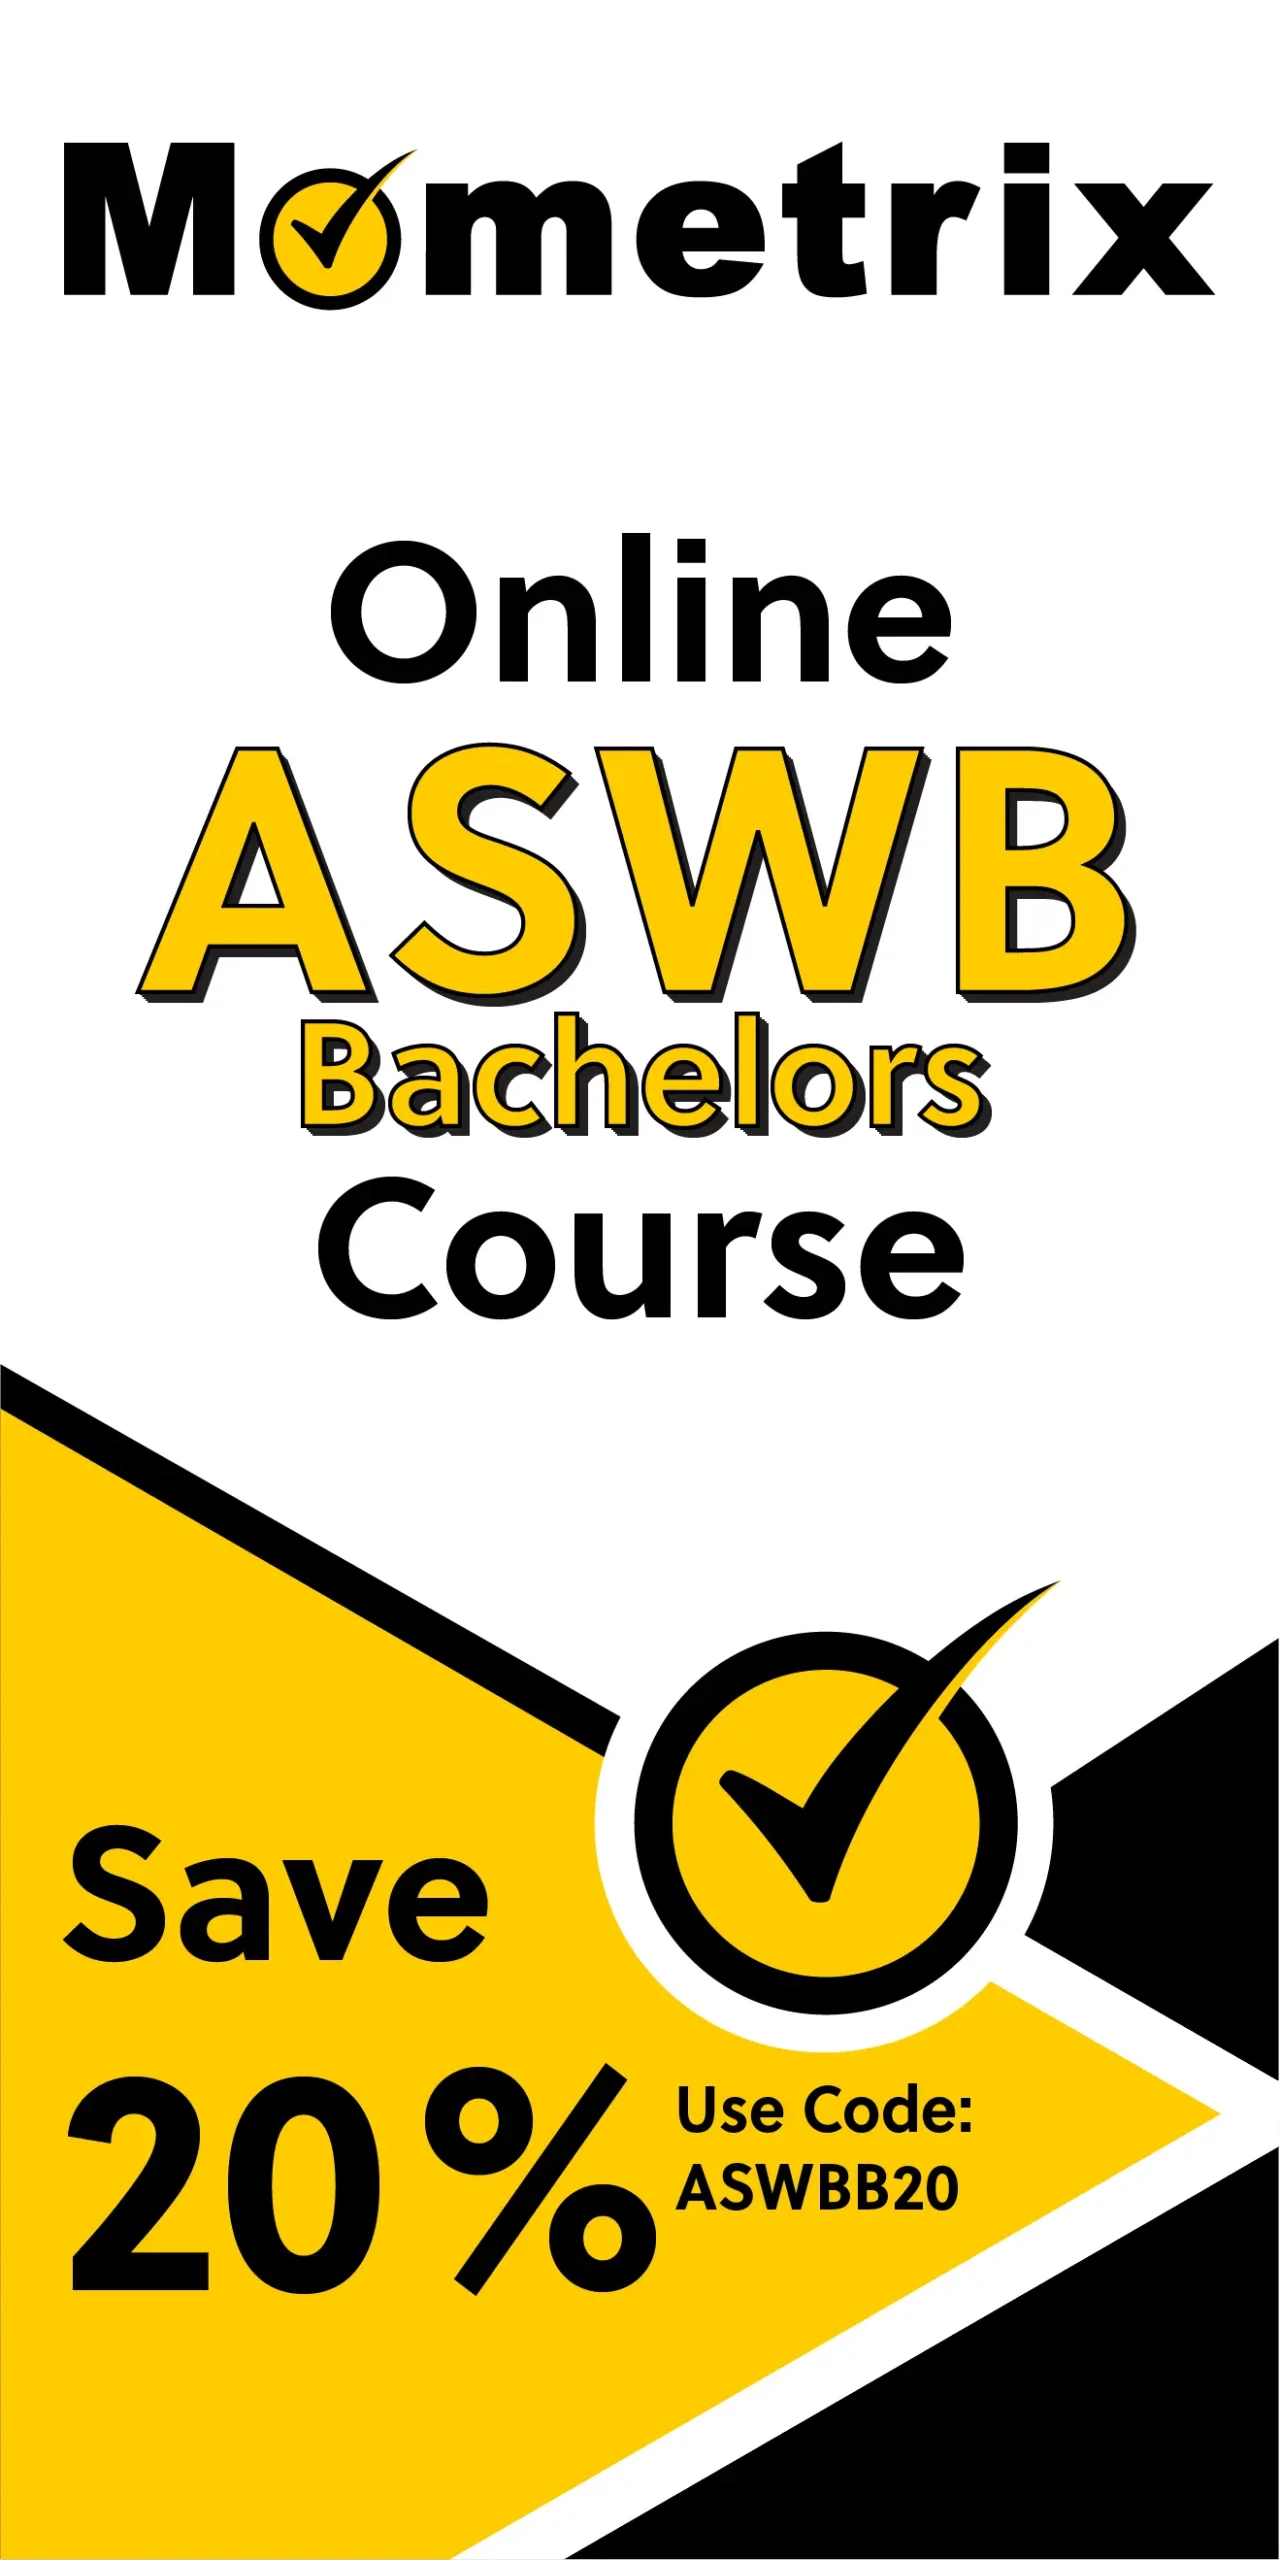 Click here for 20% off of Mometrix ASWB Bachelors online course. Use code: ASWBB20